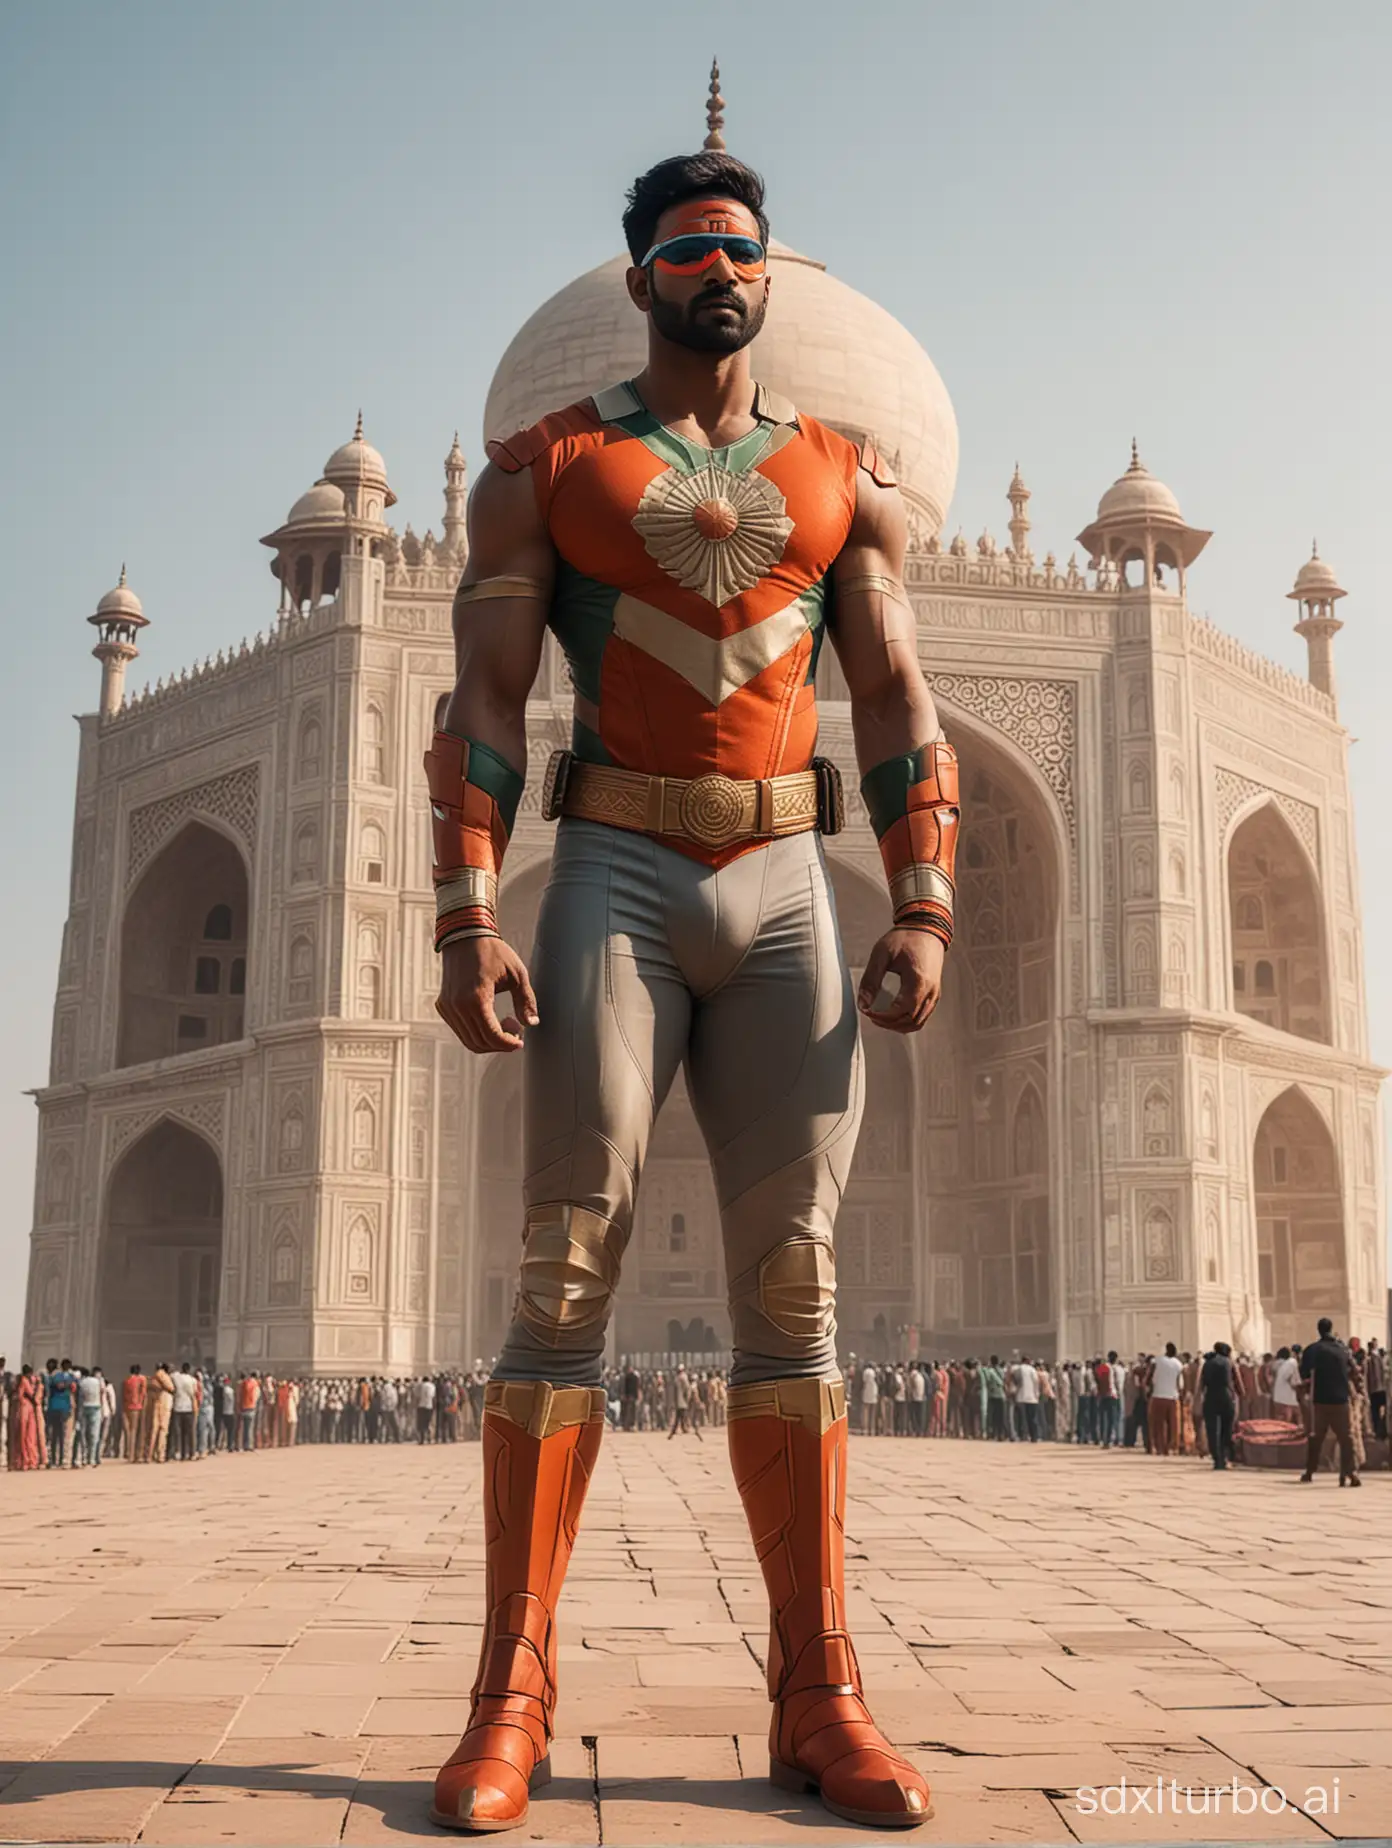 An futuristic indian superhero with costume based on indian flag colors standing near Tajmahal 